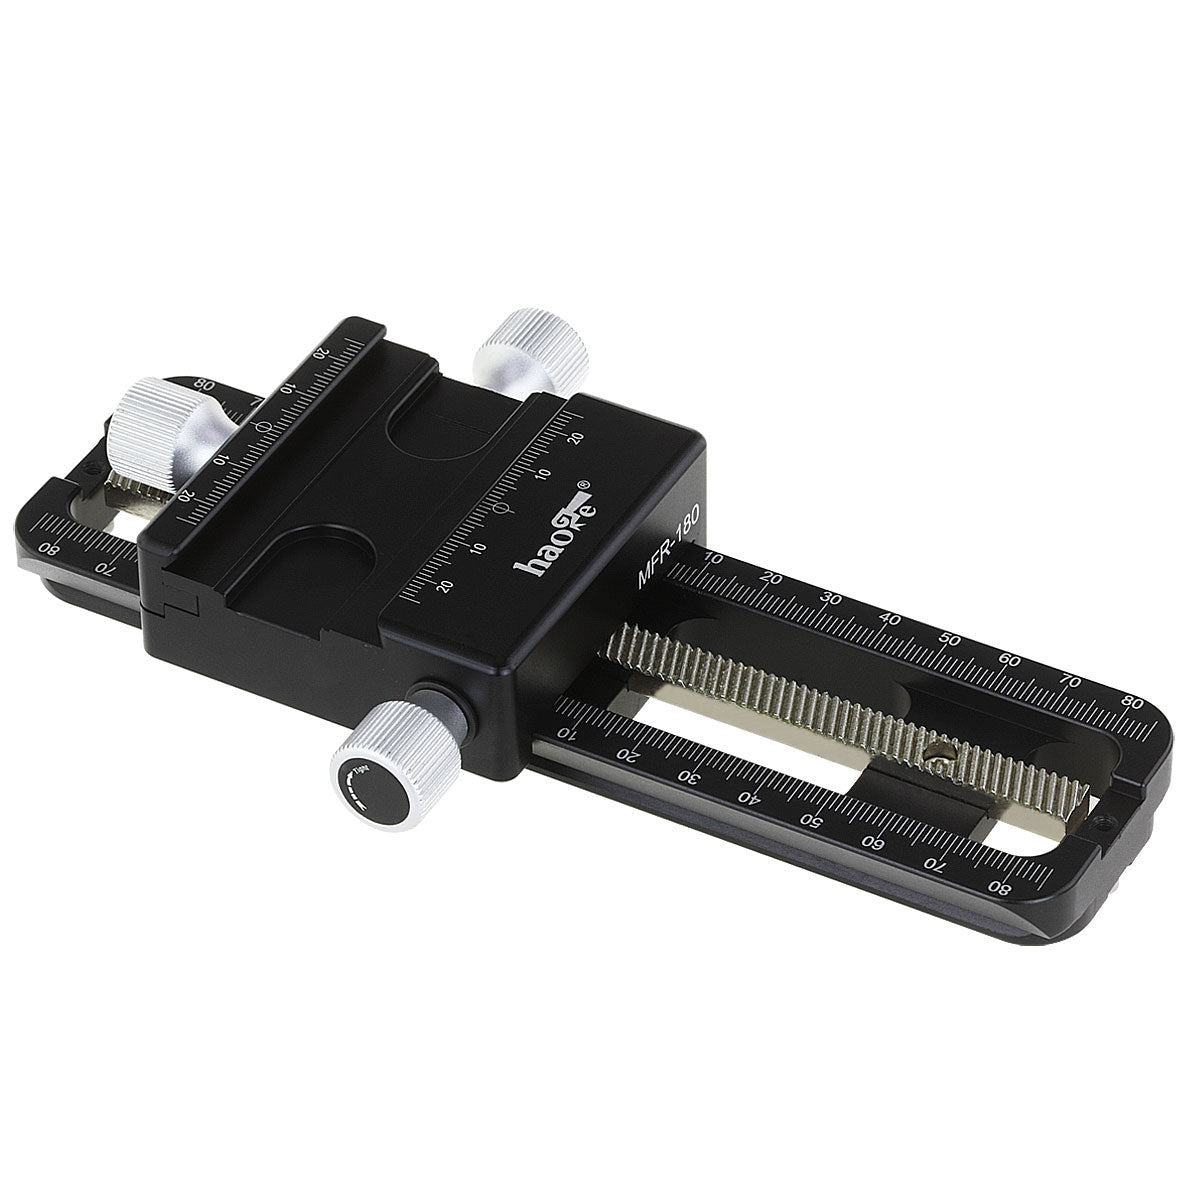 Haoge MFR-180 Macro Focusing Rail Slider for Precision Focus Stacking Nodal Slide Macro Close-up Photography built-in Arca type Quick Release Clamp and Arca Dovetail Groove